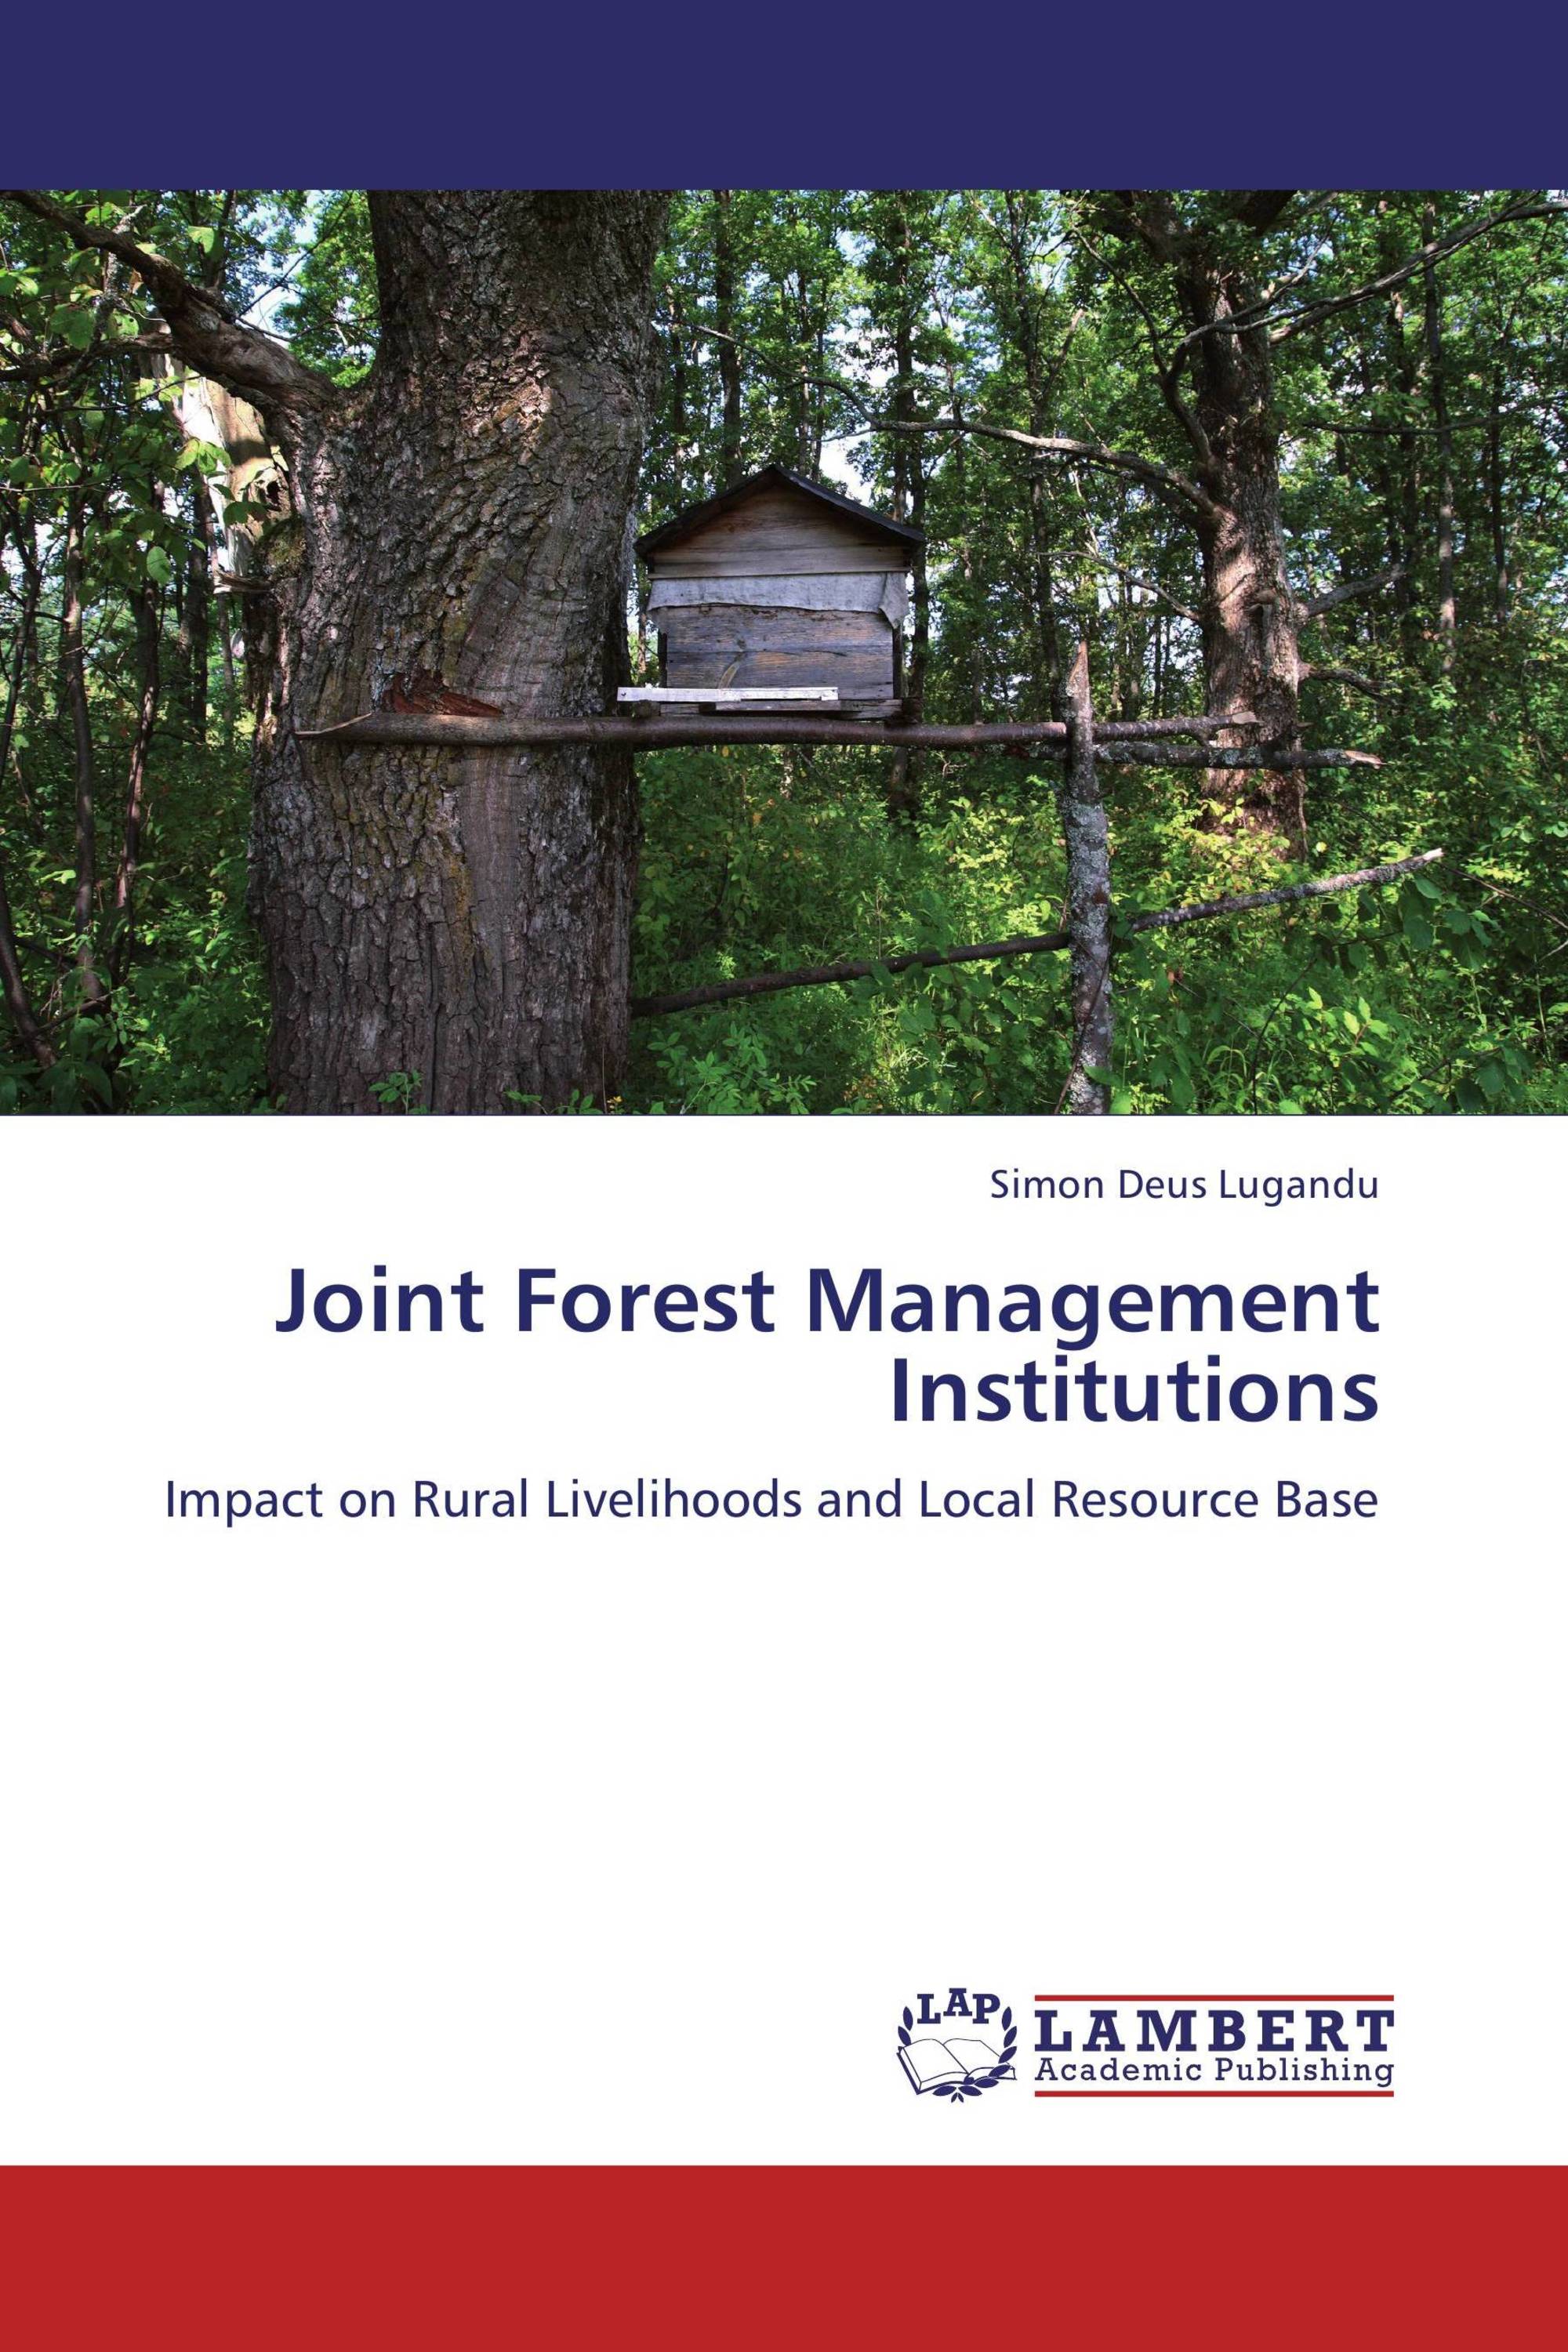 thesis about forest management